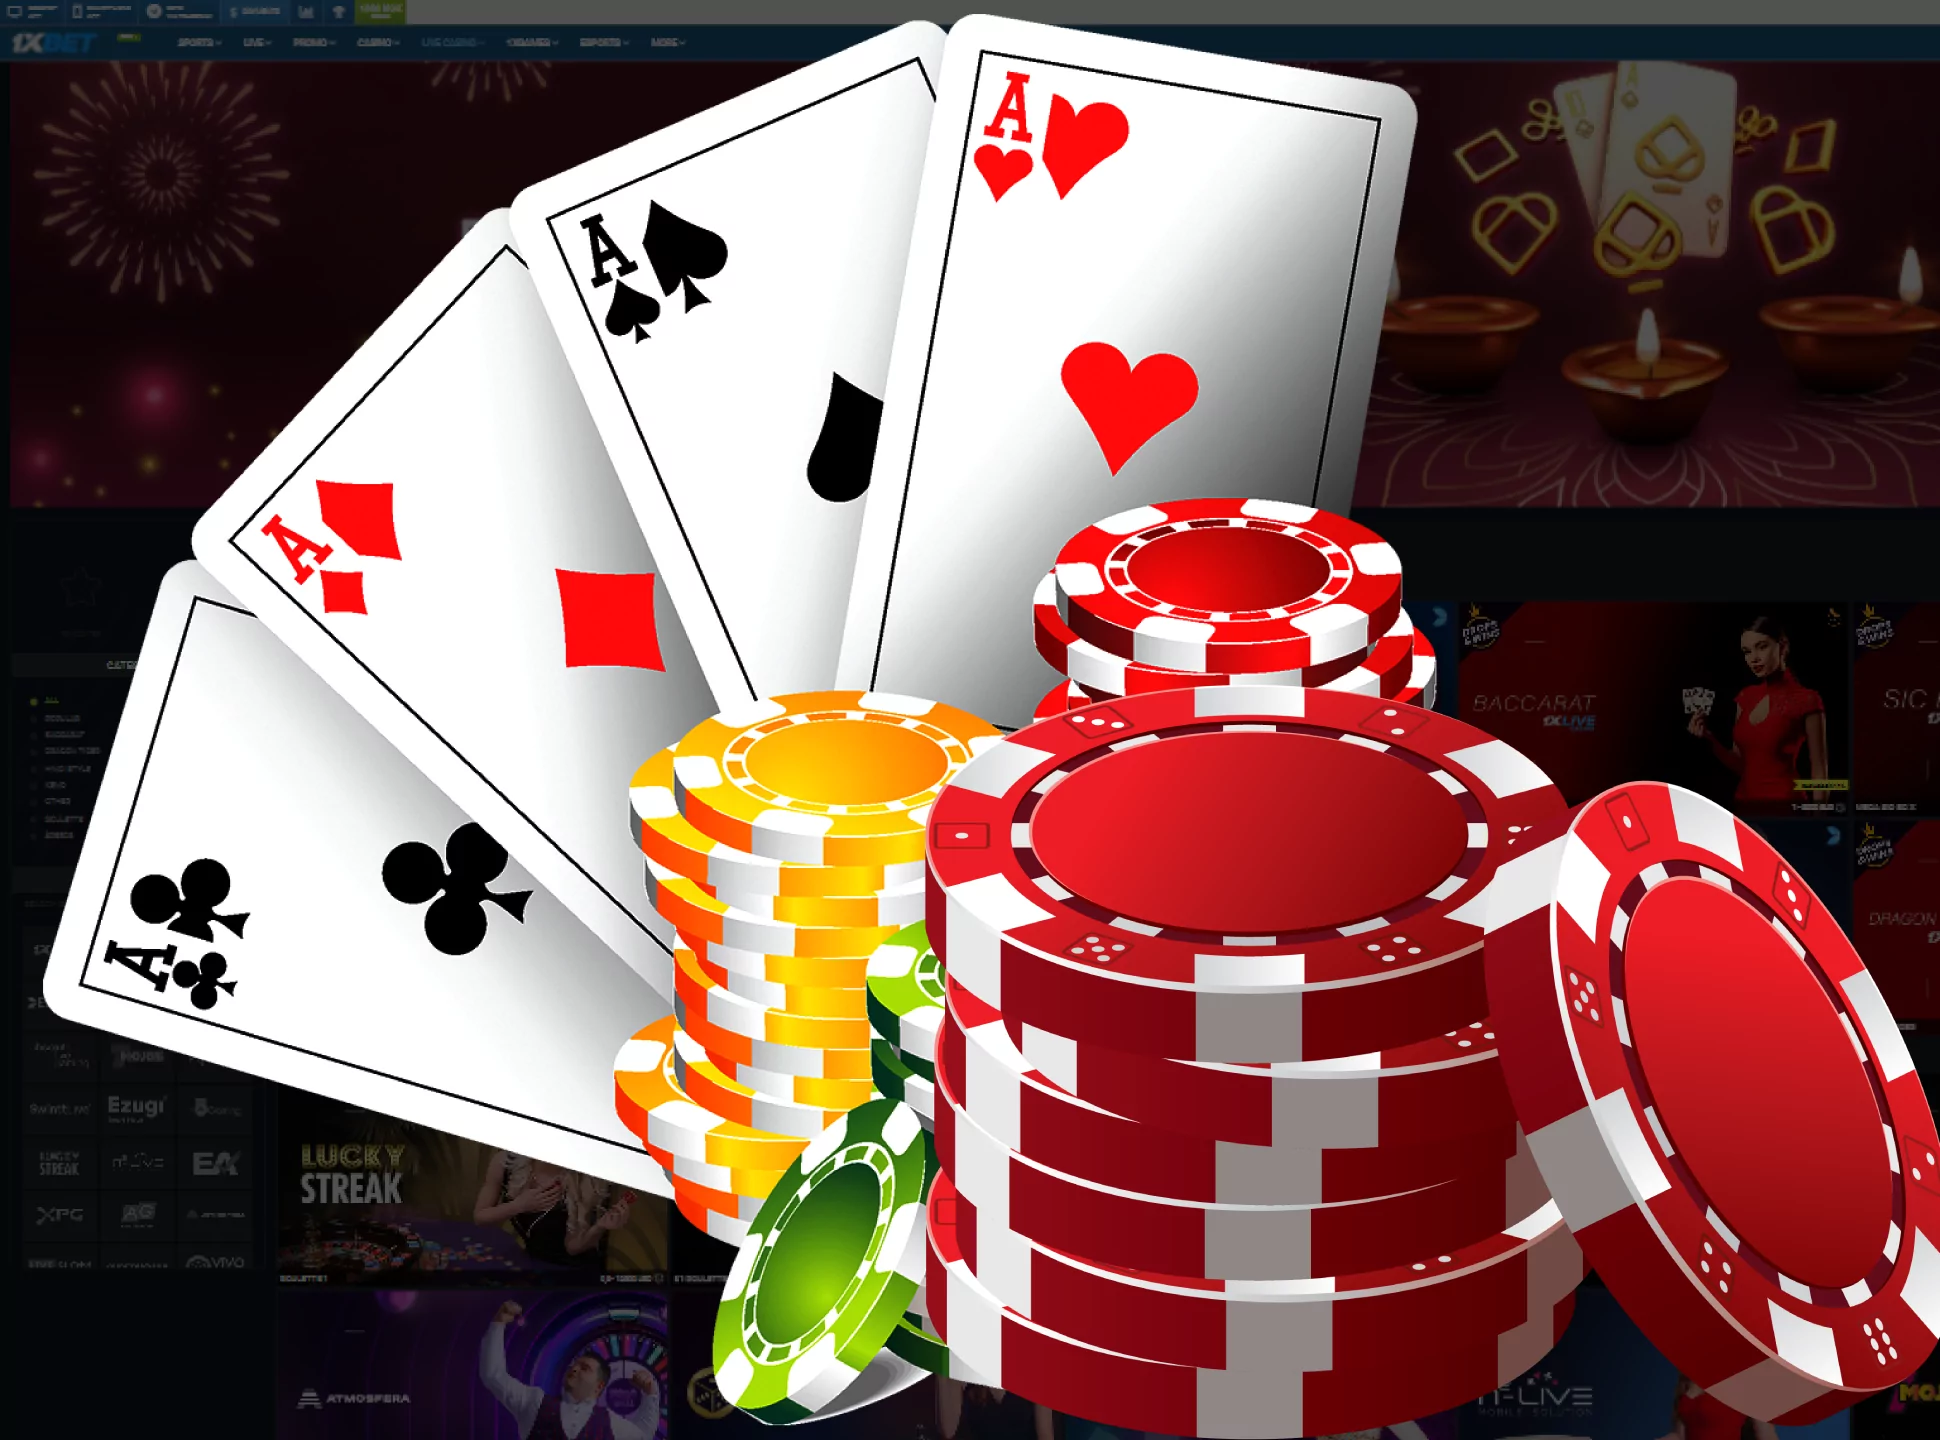 Play poker against the real opponents in an online casino.